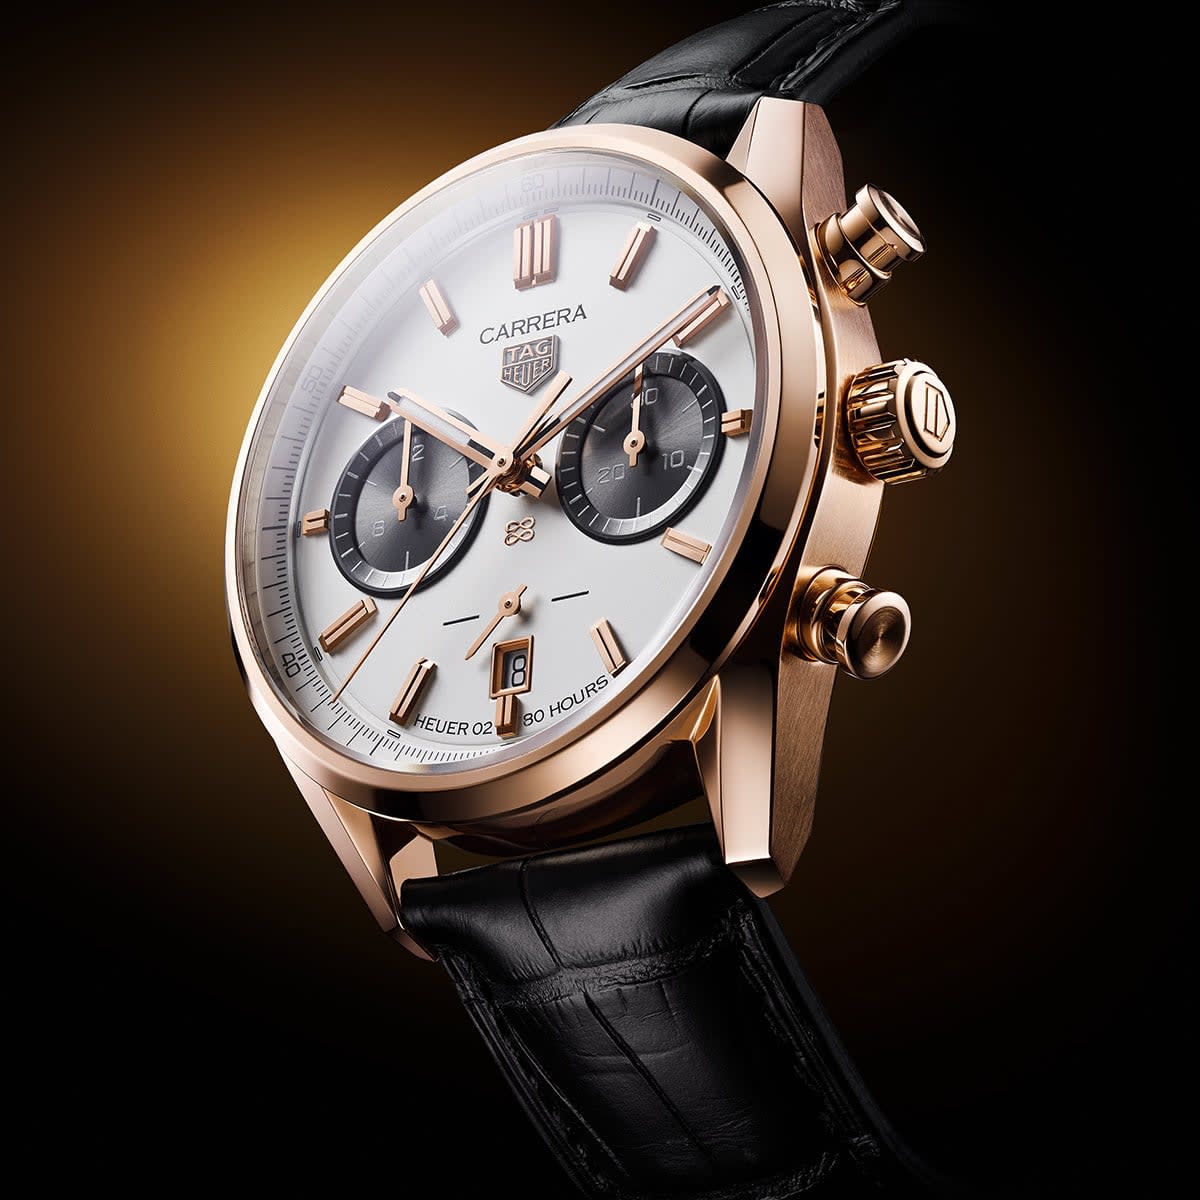 A Limited Edition Gold Tag Heuer Carrera to Celebrate Jack heuer